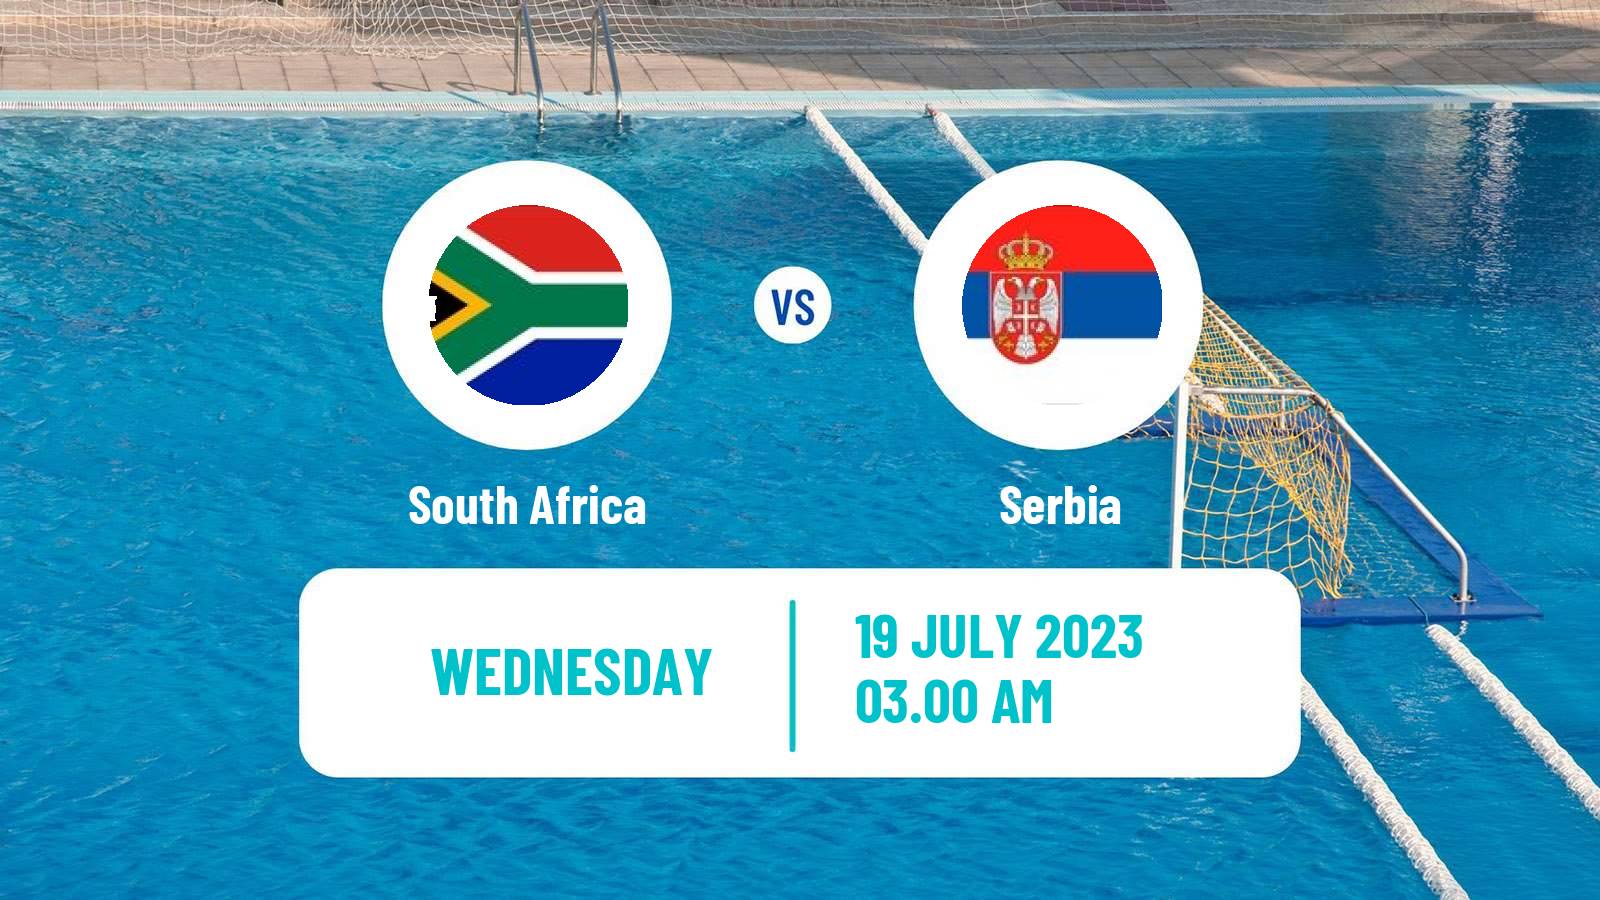 Water polo World Championship Water Polo South Africa - Serbia